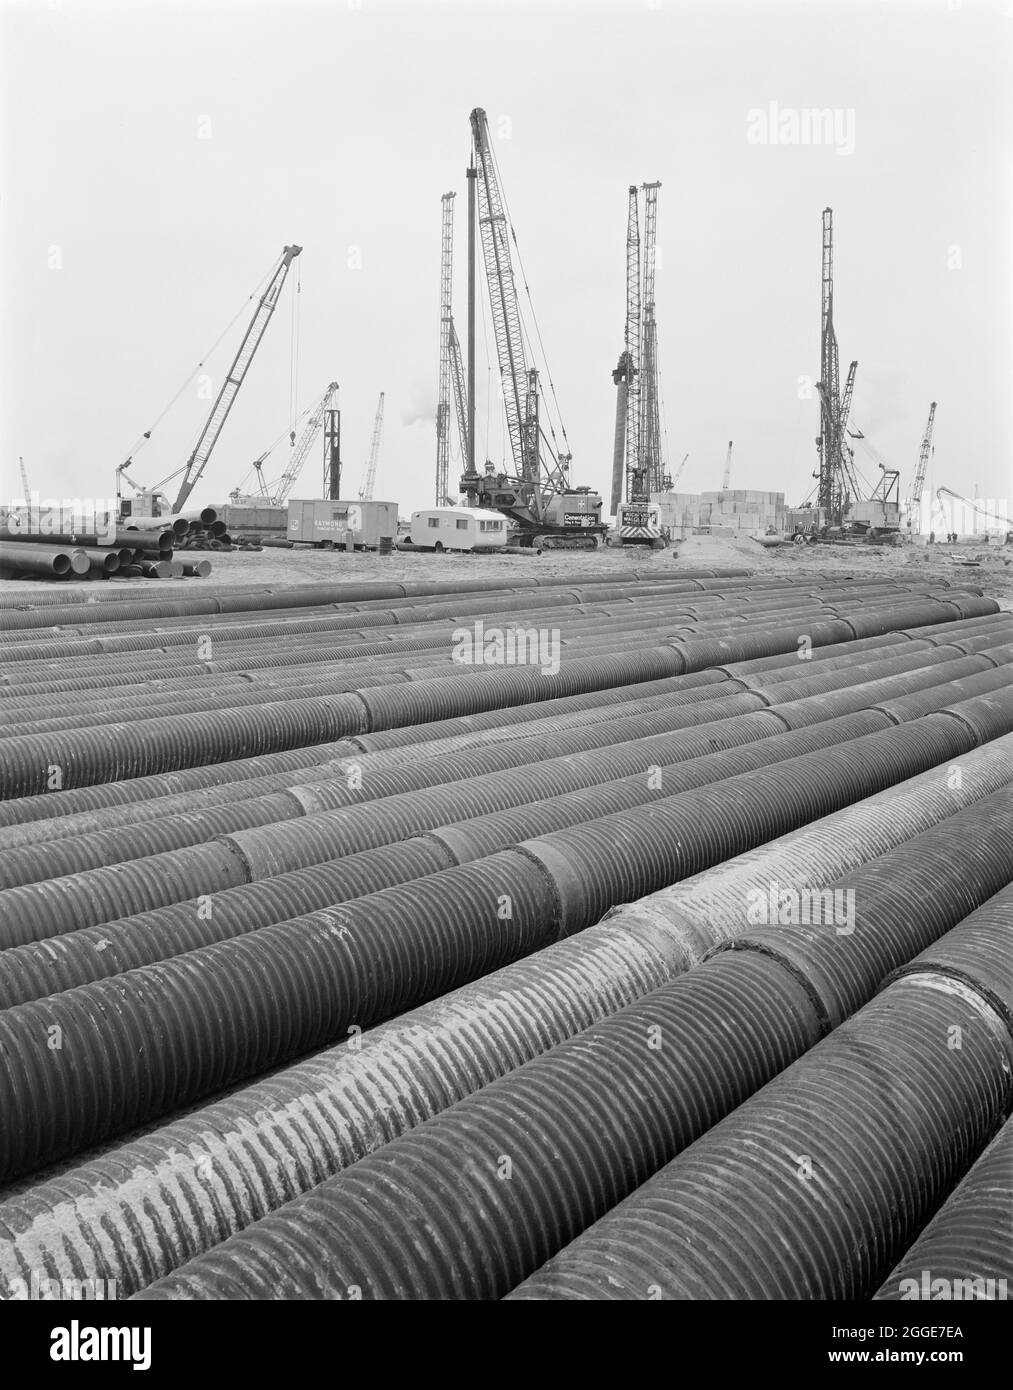 Piling in progress during the construction of the Isle of Grain Power Station, showing a stockpile of ribbed tubing laid out in the foreground. The Isle of Grain Power Station was an oil fired power station built in the 1970&#x2019;s by multiple contractors, including John Laing and Son Ltd. When the power station opened in 1979, it had the second tallest chimney in the UK at 244 metres high. The power station has now been demolished and the chimney was destroyed in September 2016. A new Combined Cycle Gas Turbine (CCGT) power station has been built at the site. Stock Photo